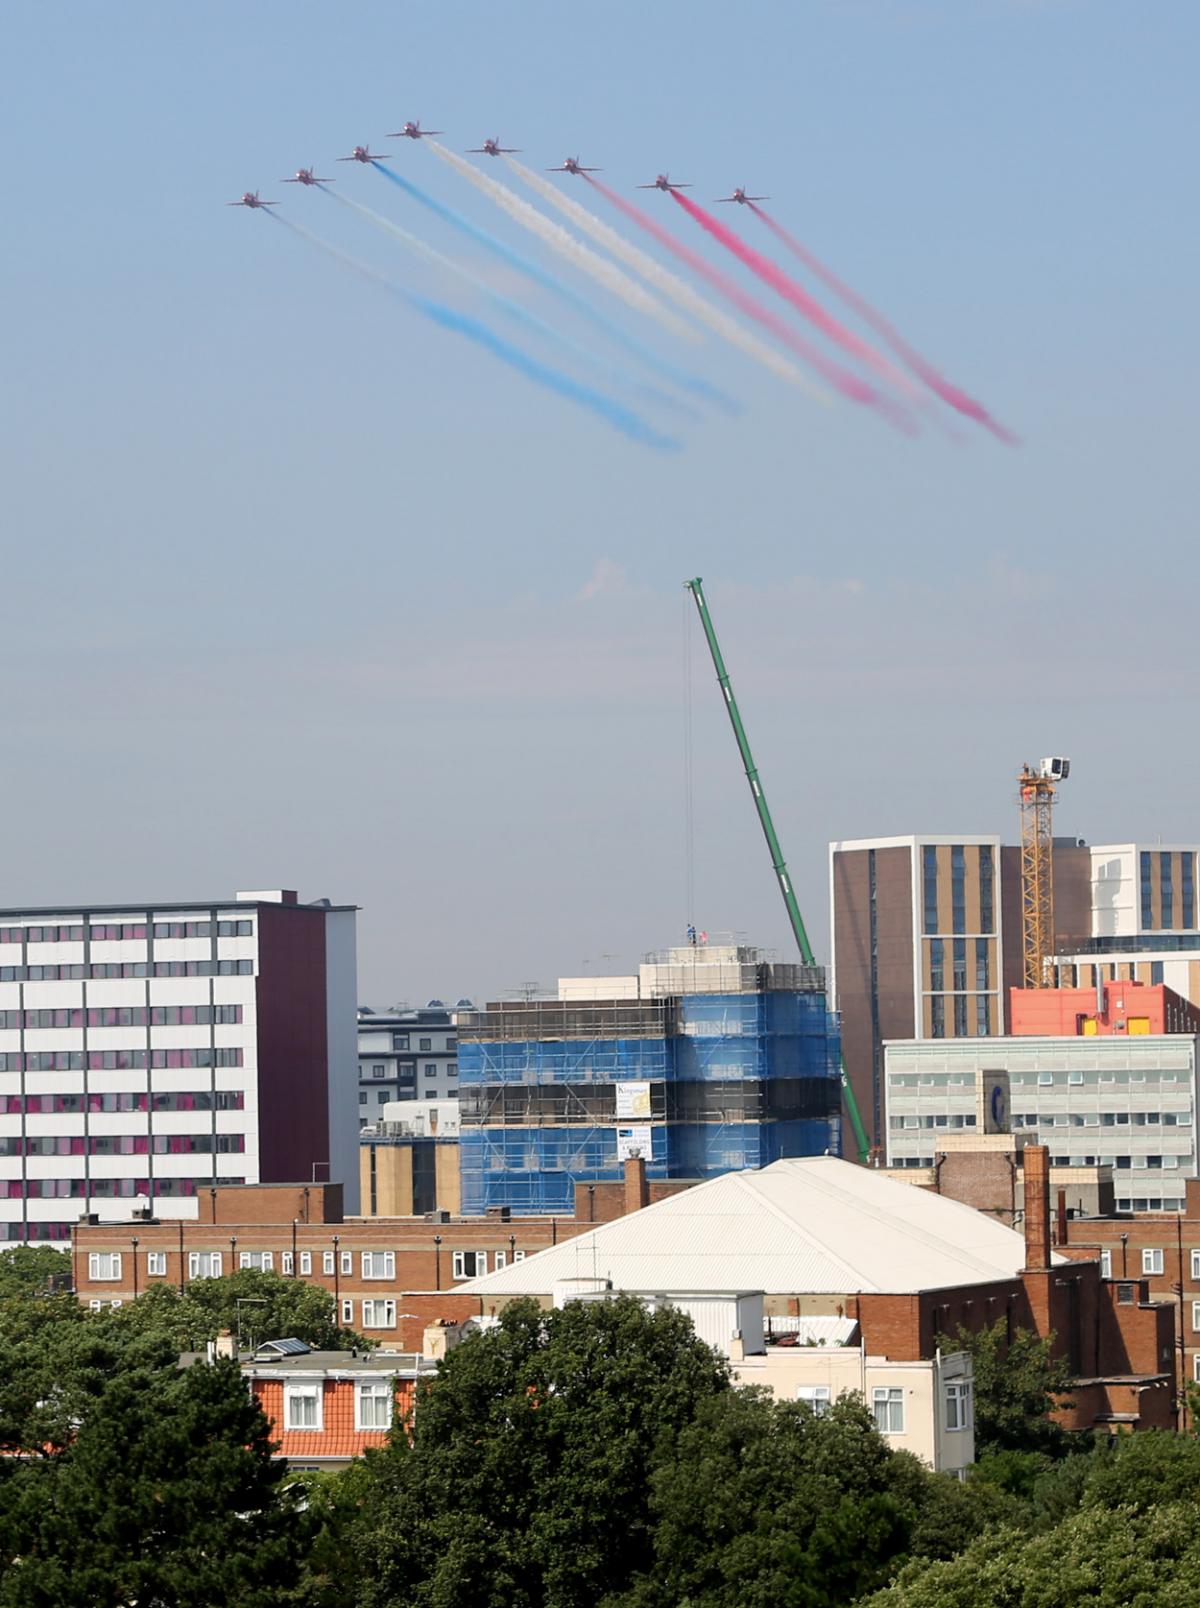 Day three at the Bournemouth Air Festival 2015. Pictures by Richard Crease, from the roof of the Cumberland Hotel.